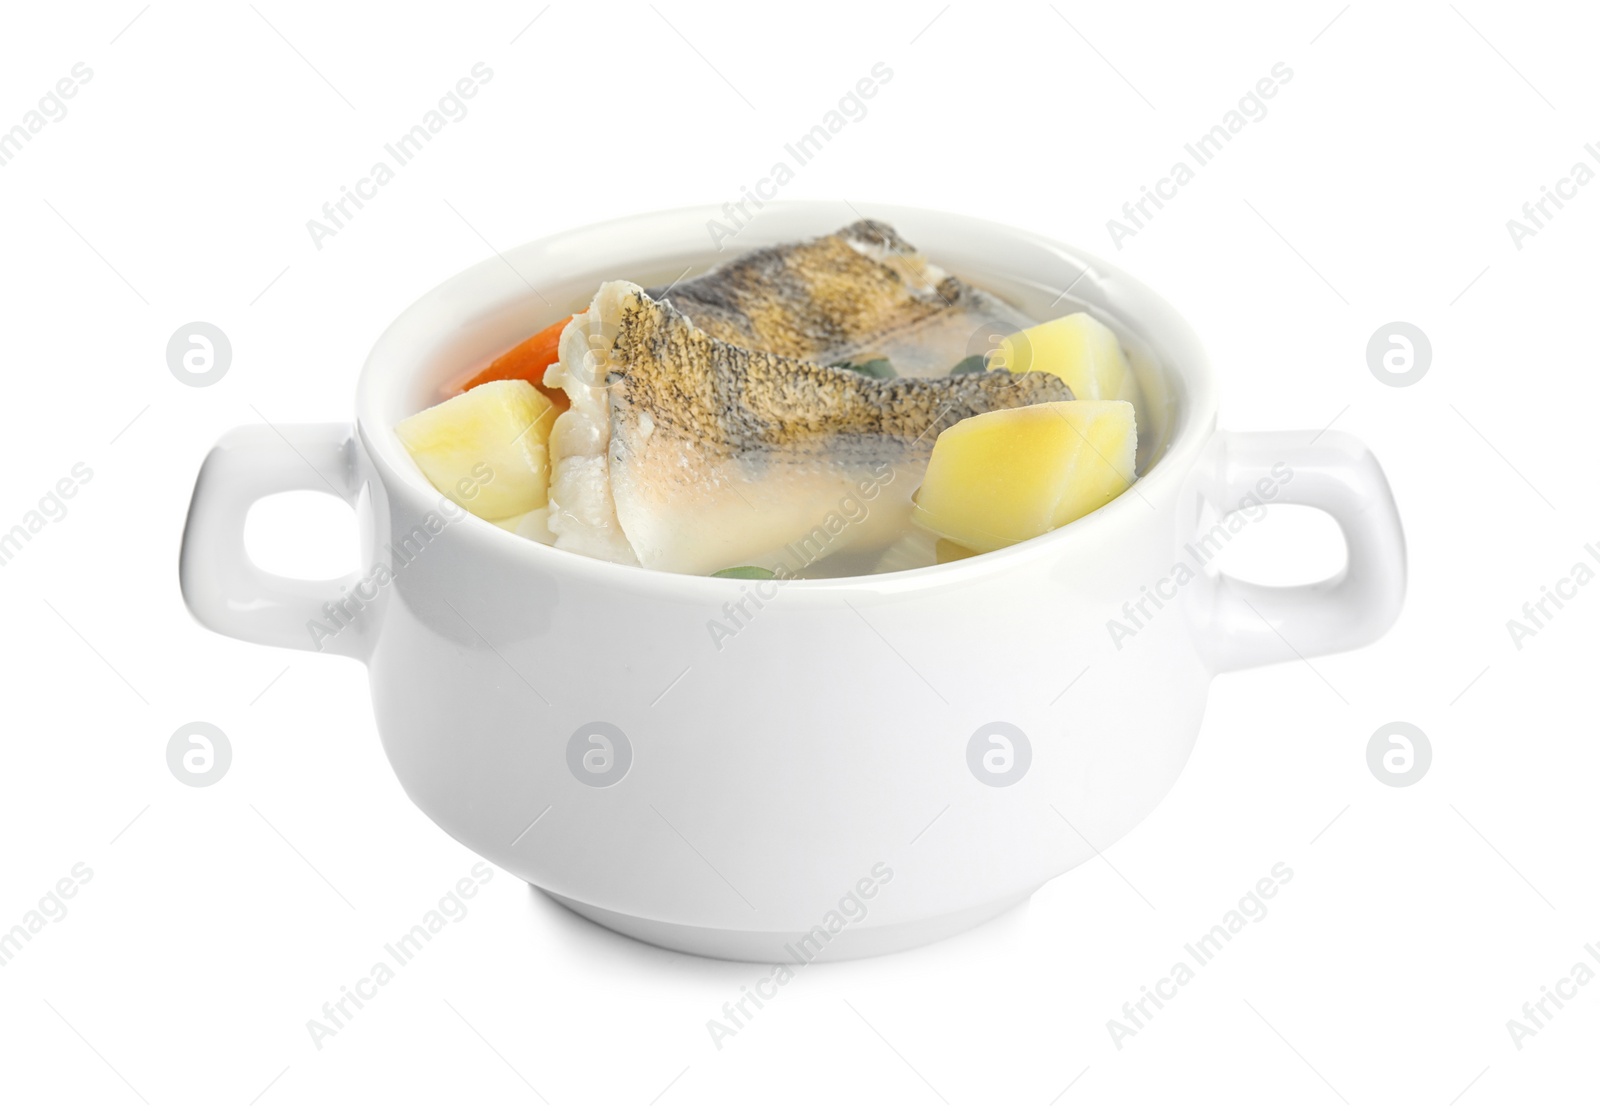 Photo of Delicious fish soup in bowl isolated on white